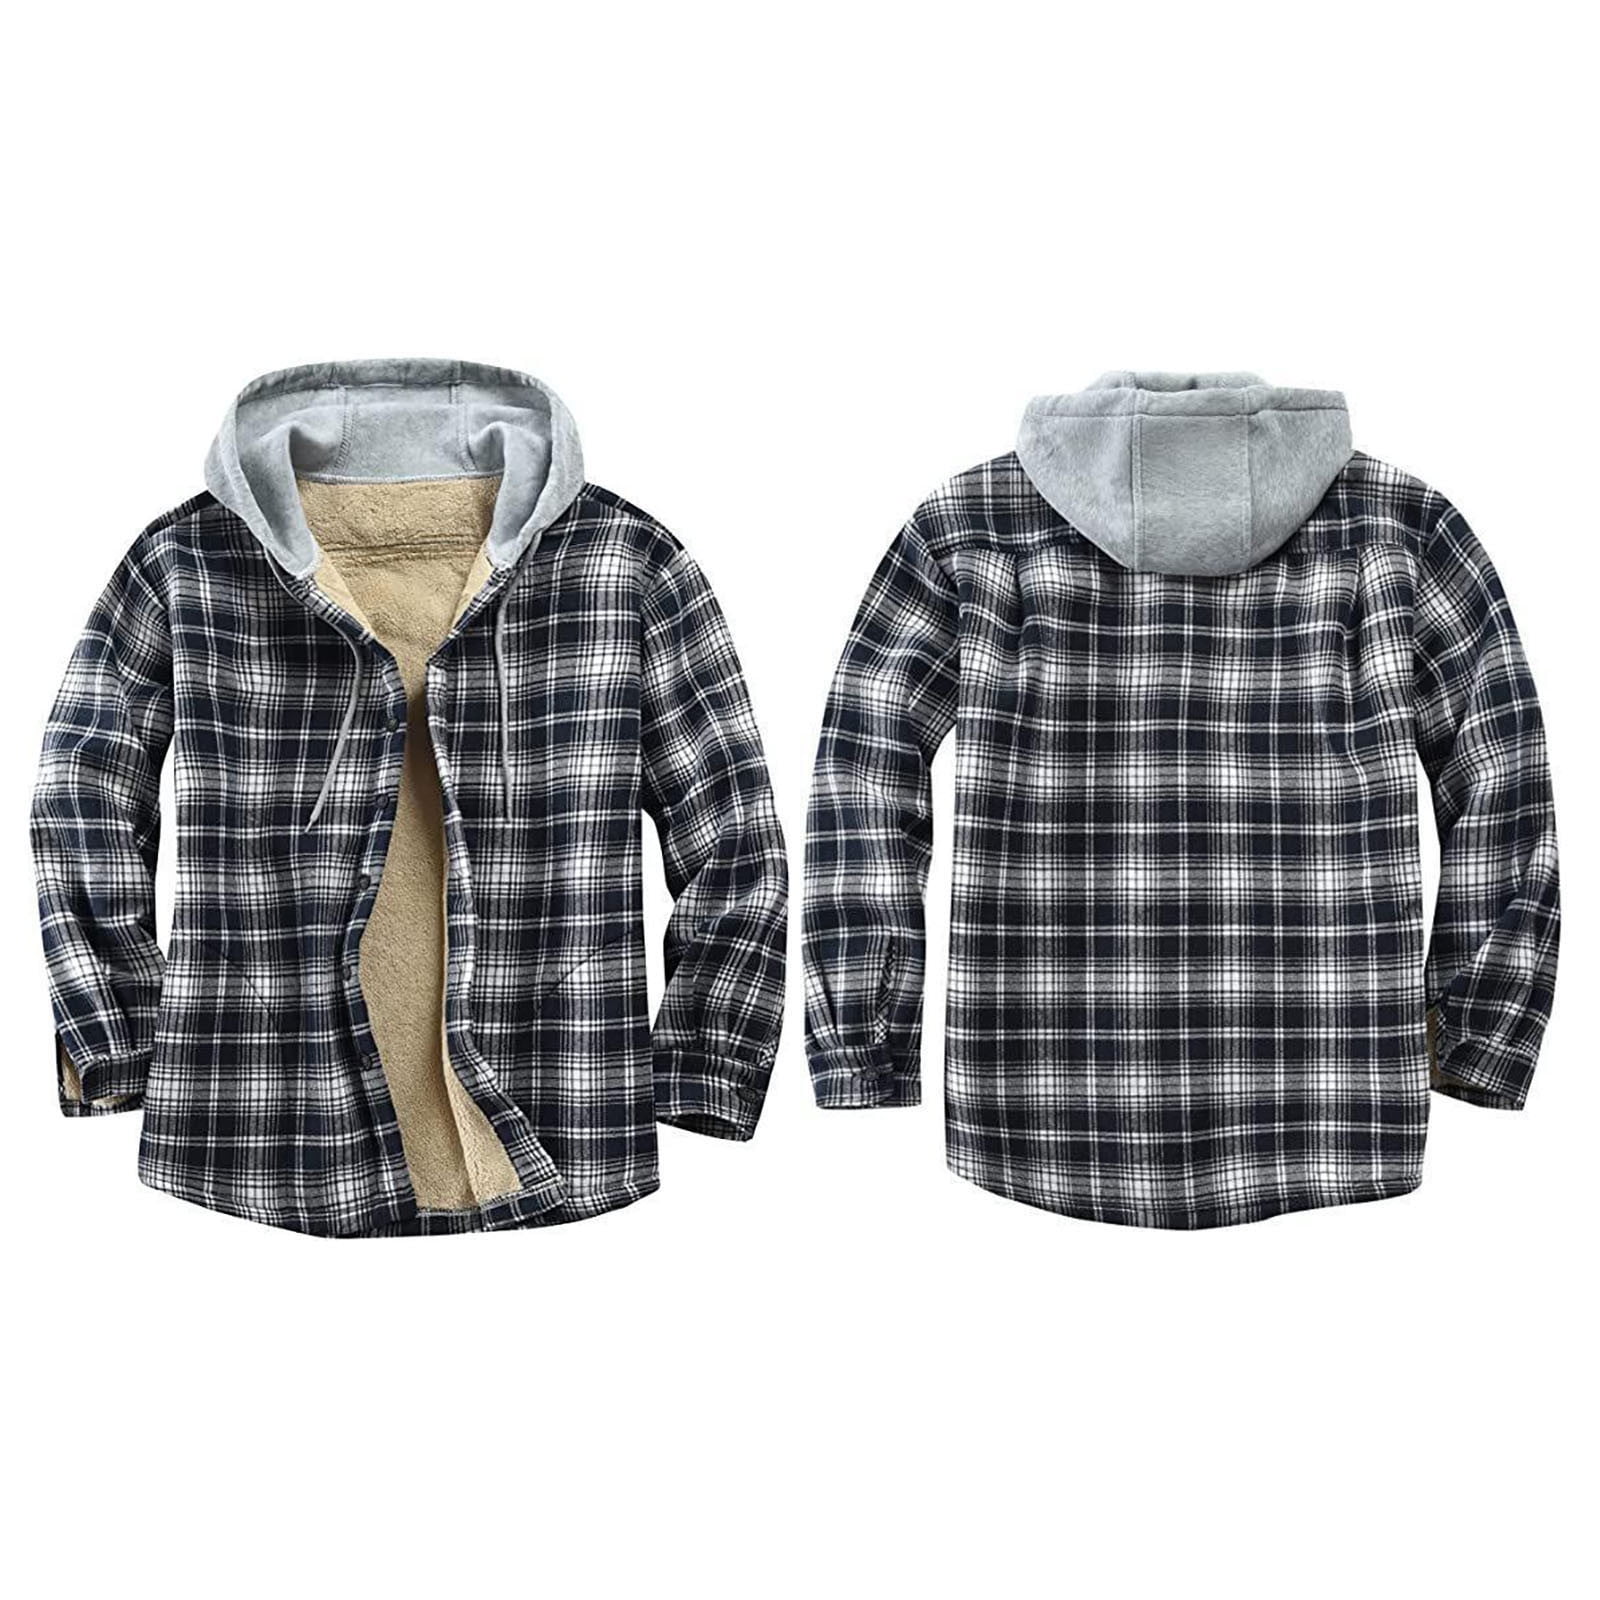 Wolverine Men's Marshall Cotton Flannel Shirt Jacket at Tractor Supply Co.-hangkhonggiare.com.vn